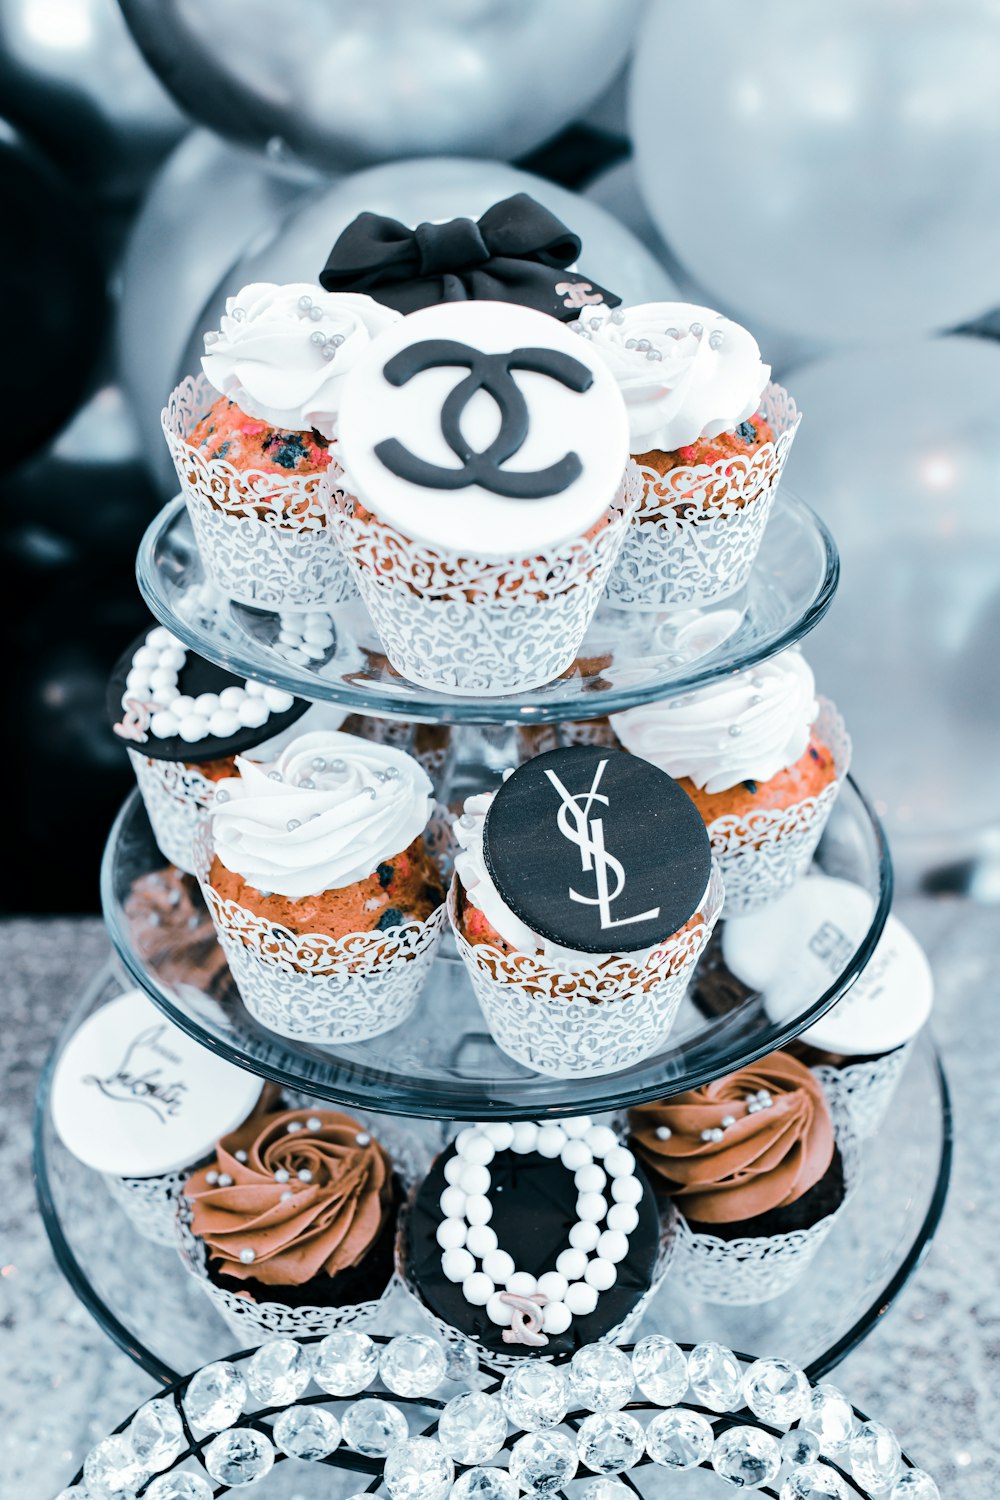 Red Velvet Cupcakes  Chanel cupcakes, Cupcake cakes, Chanel cake